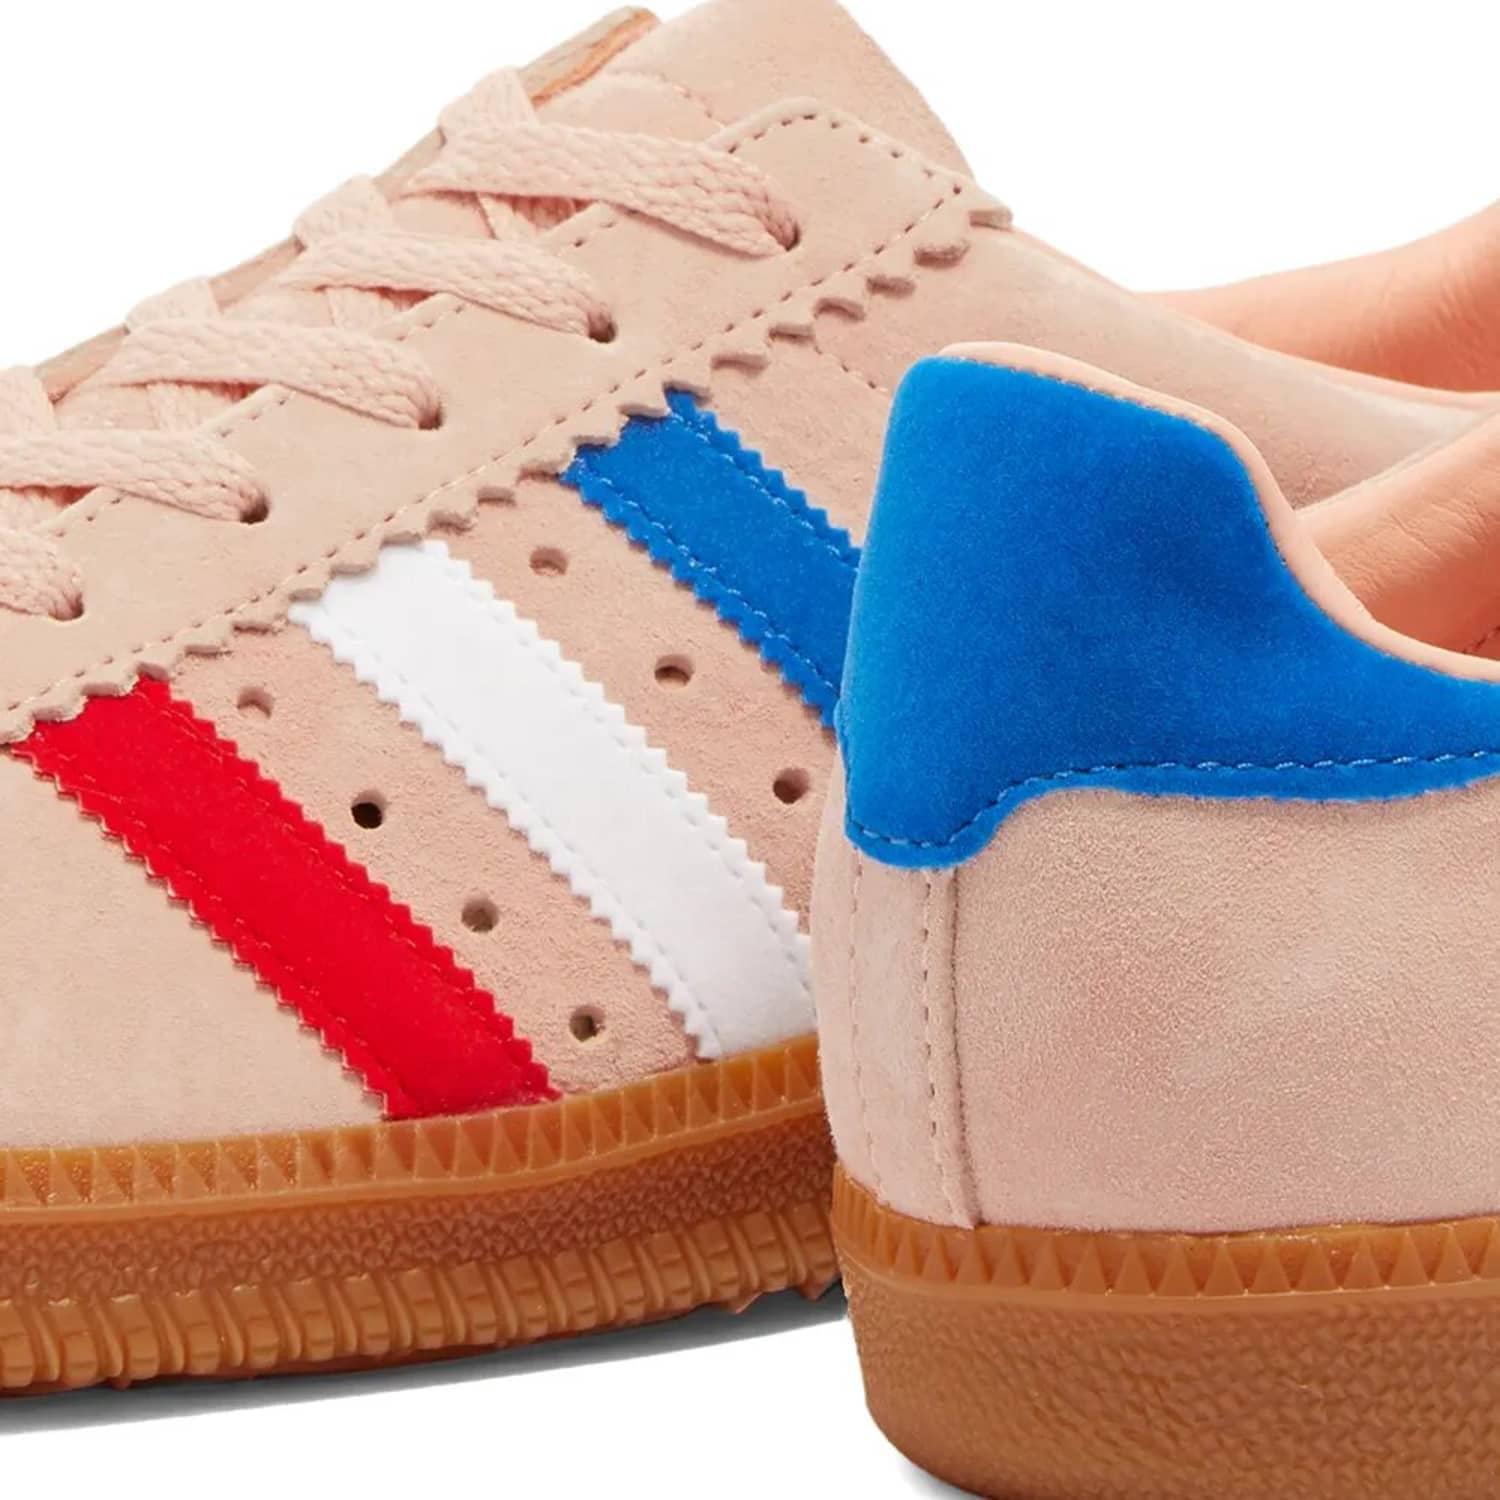 adidas Suede Padiham in Pink, Blue & Red (Pink) for Men - Save 63% | Lyst